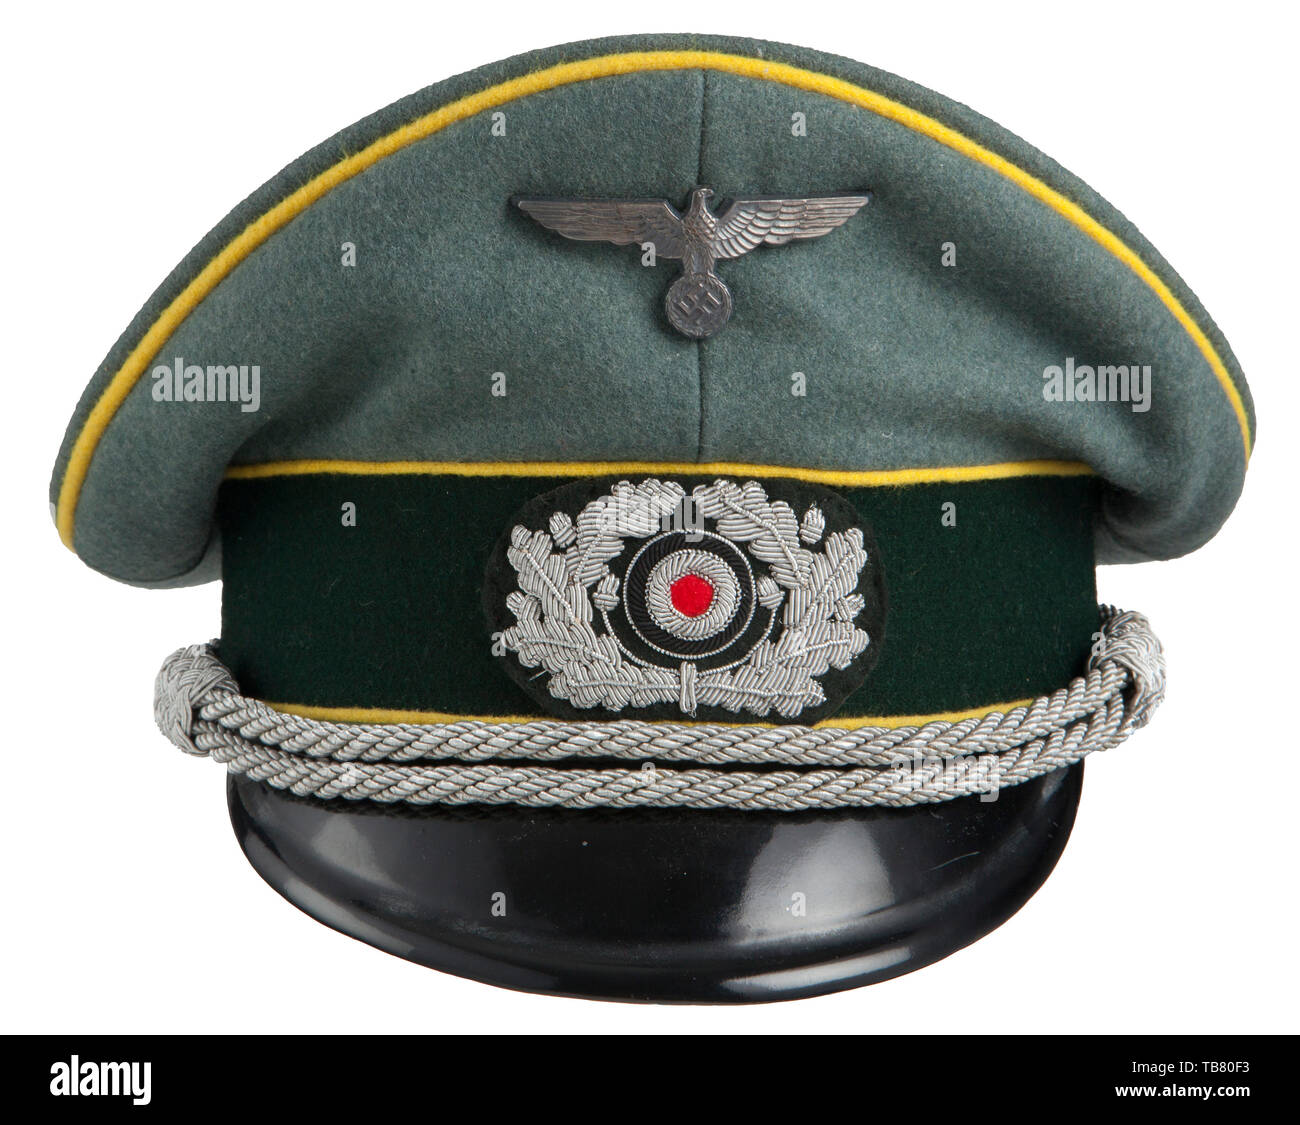 THE JOHN PEPERA COLLECTION, A Visor Hat copy for Officers of the Army, Signal, Field grey doe skin wool, dark green wool centre band, lemon yellow wool piping, silvered eagle, applied silver wire wreath and cockade, aluminium chin cords retained with pebbled side buttons, black lacquered visor, tan leather sweatband, tan silk interior lining with printed manufacturer's logo, missing moisture shield., Editorial-Use-Only Stock Photo